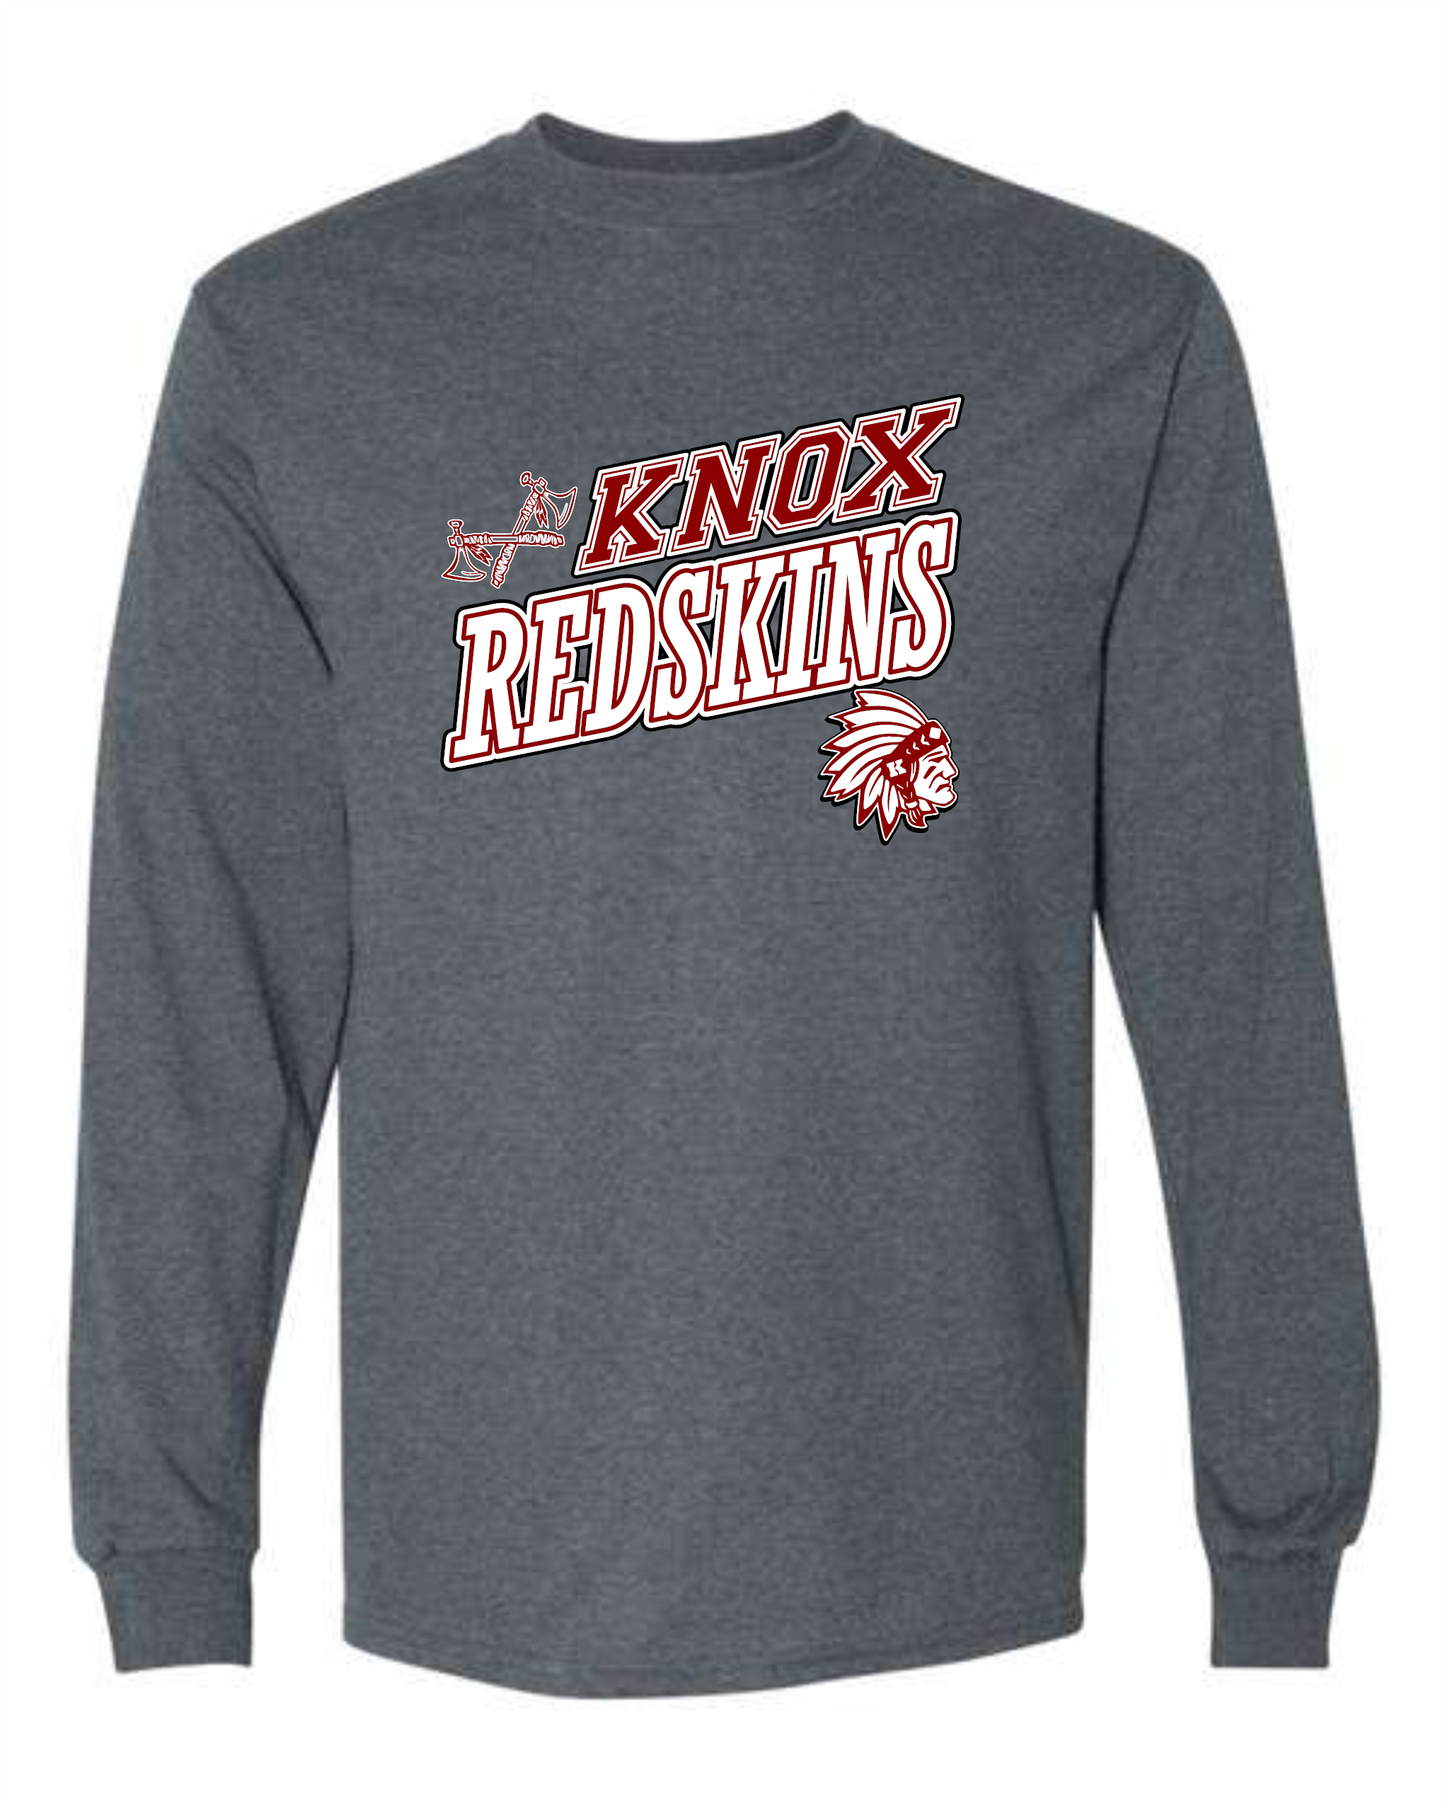 Knox Redskins Long Sleeve T-Shirt - 2 Color Options - Kids Sizes too